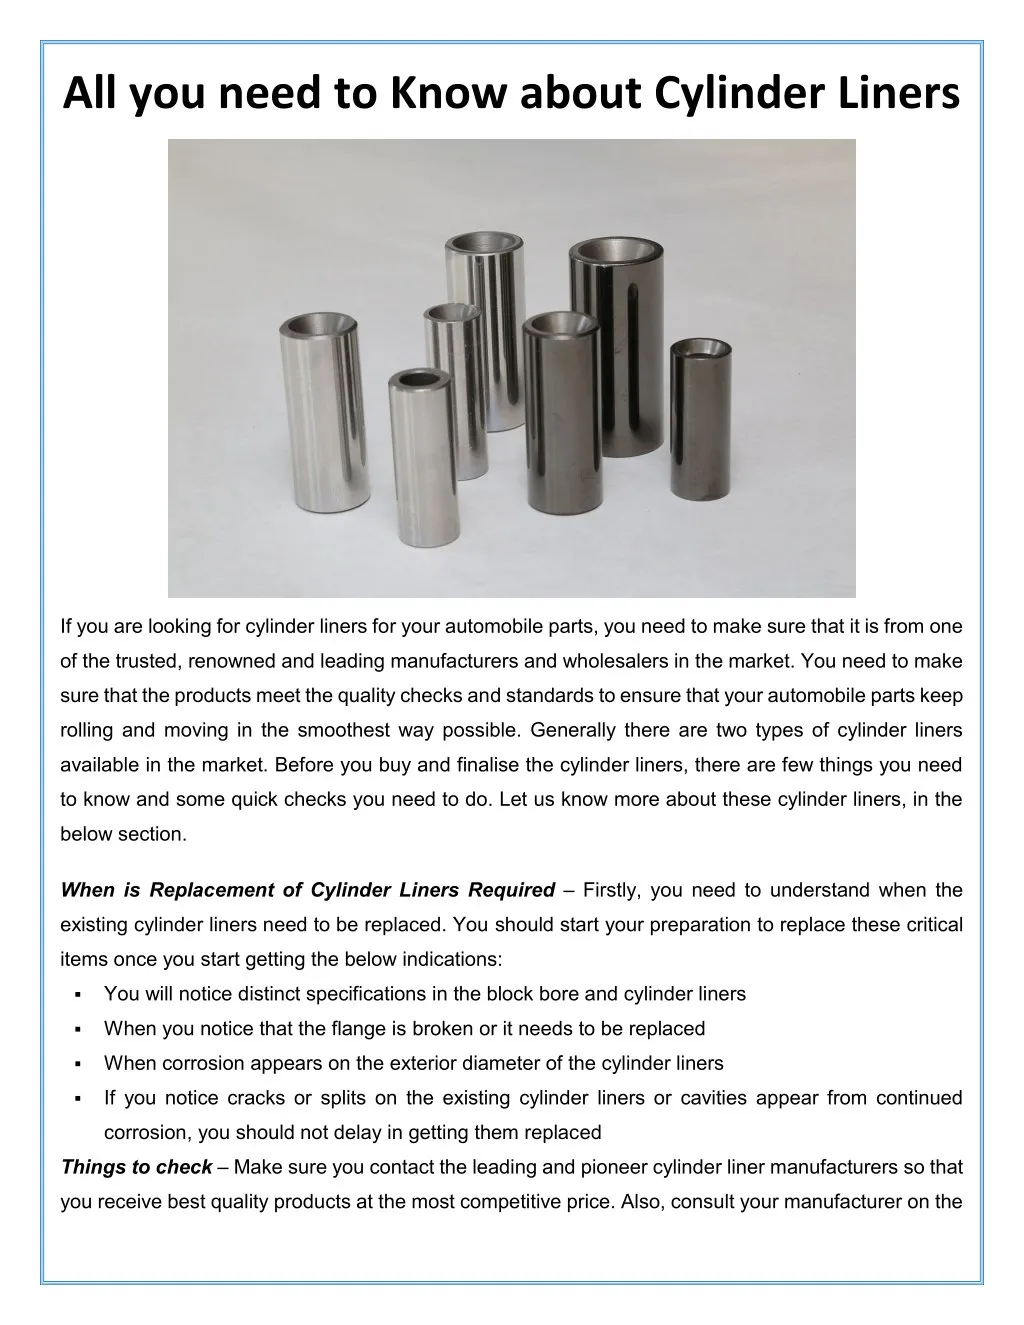 all you need to know about cylinder liners